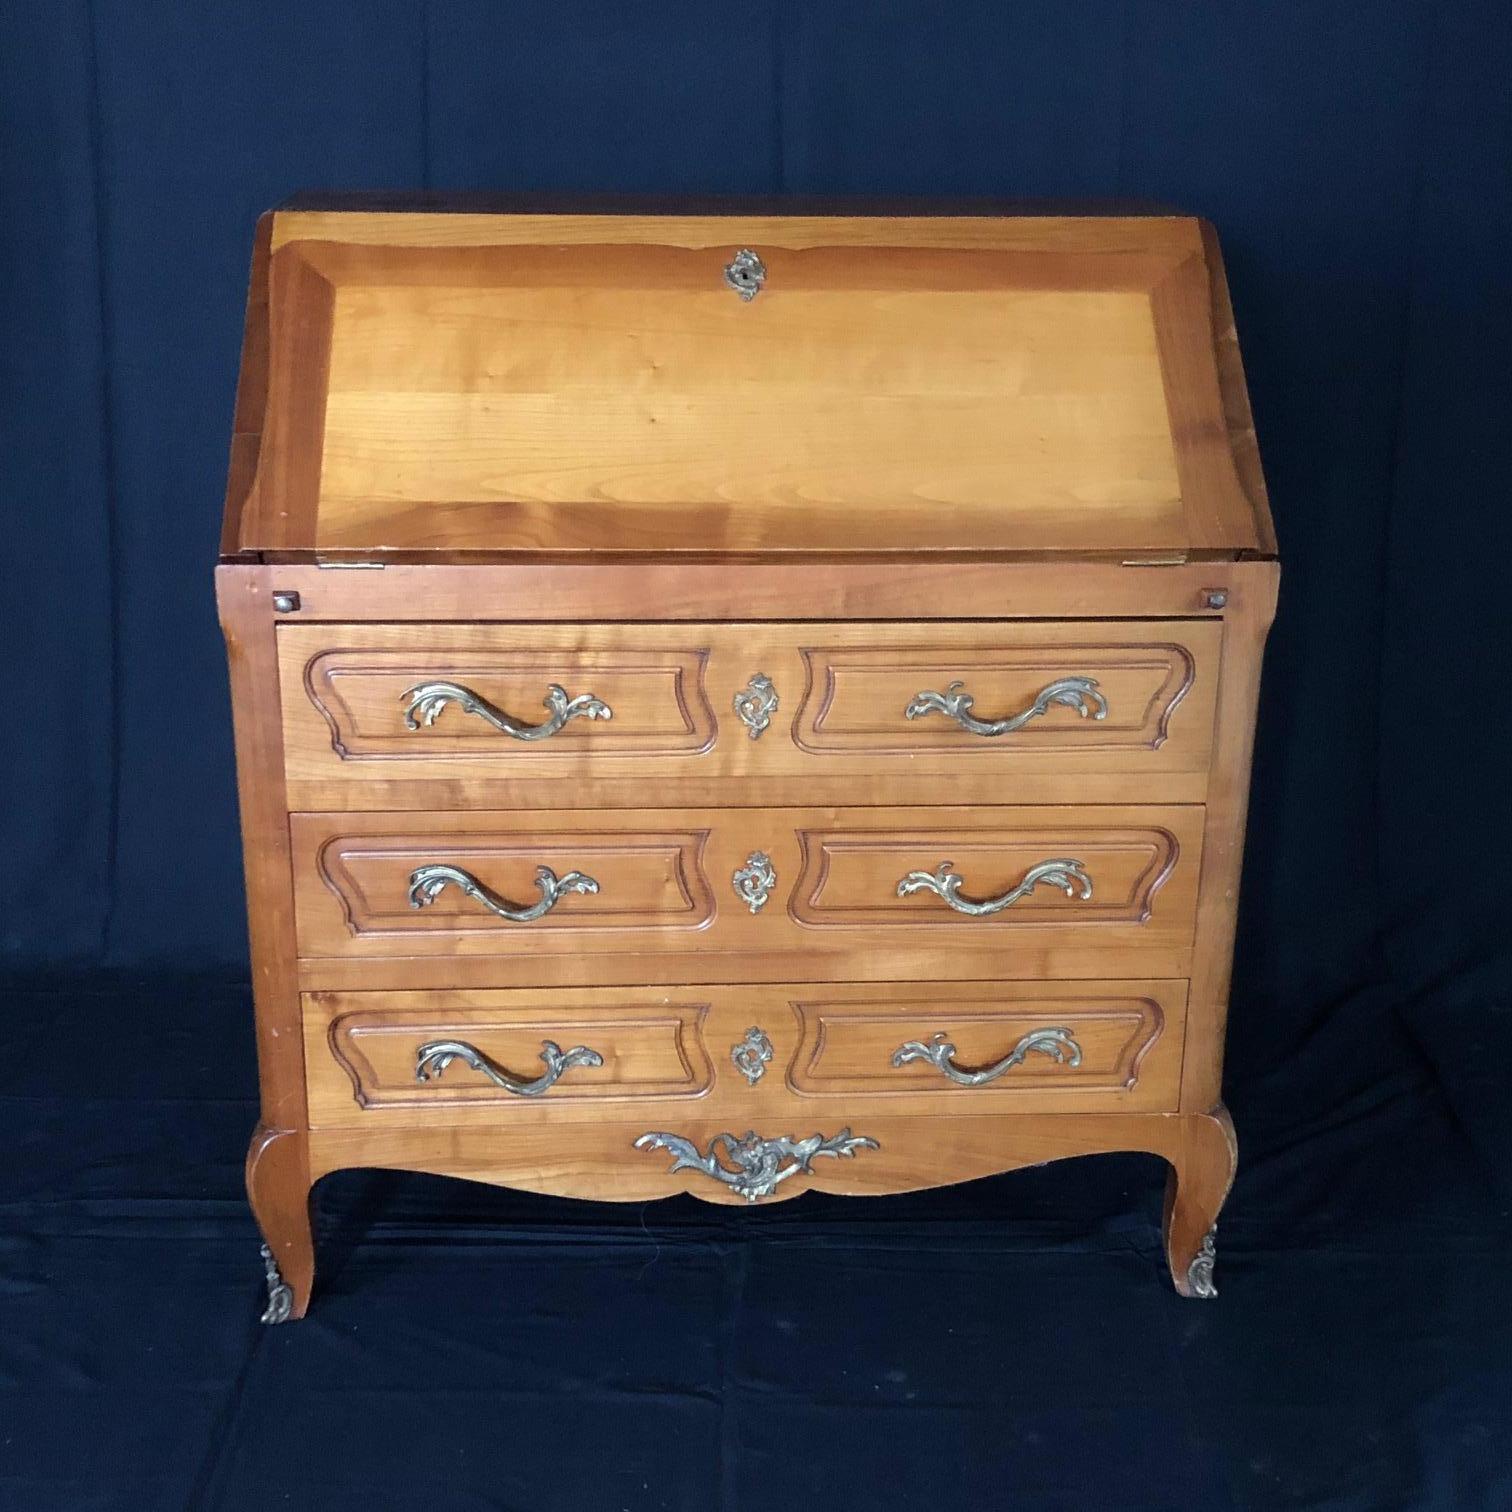 Louis XV style carved oak drop front secretary bureau or writing desk, when opened revealing a fitted desk interior with four drawers and a large writing area held by two pull out supports. The original embossed beige leather writing surface is in